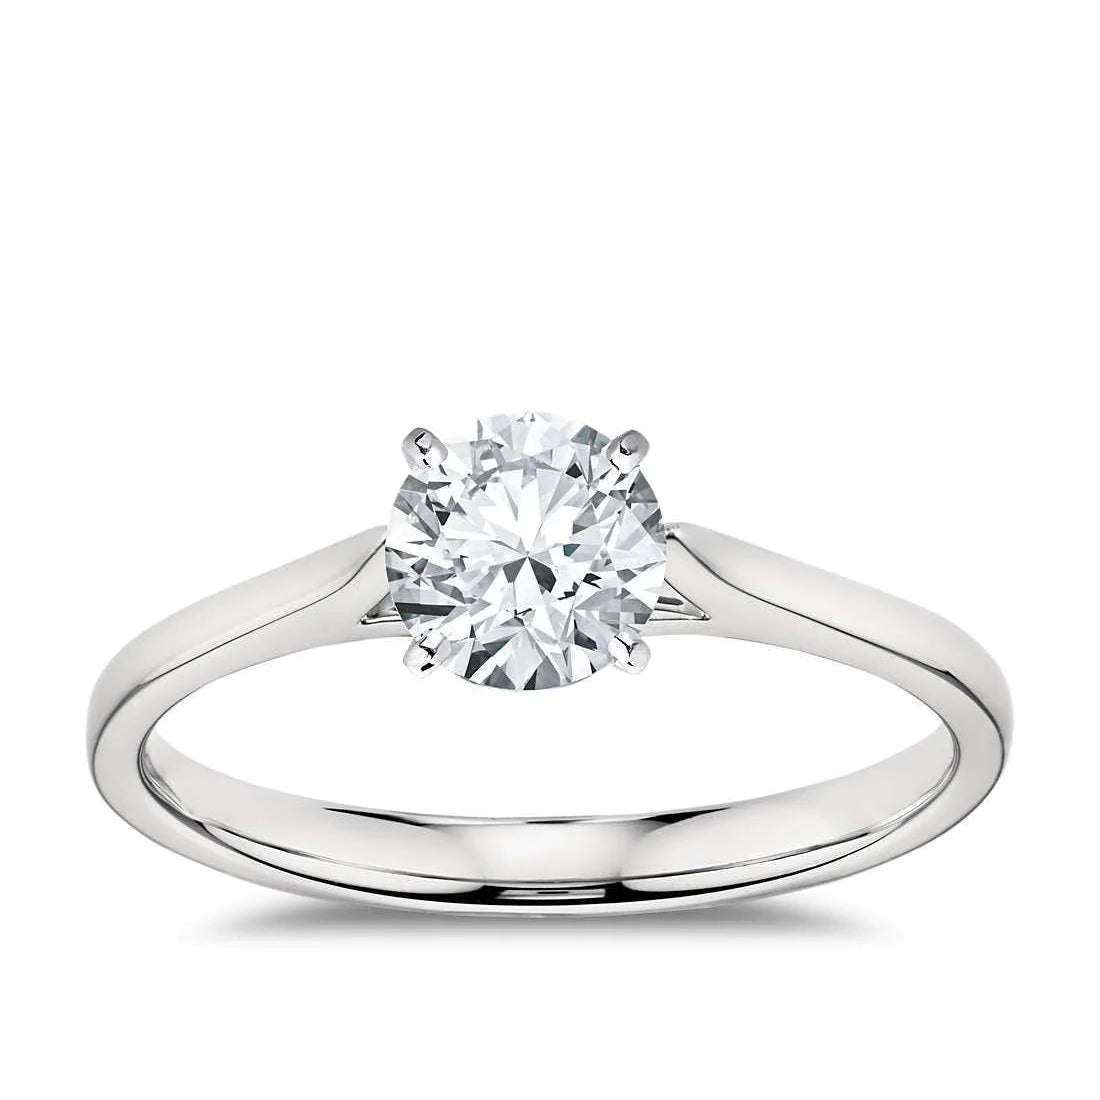 Round Cut 1.90 Carat Natural Diamond Solitaire Ring White Gold 14K